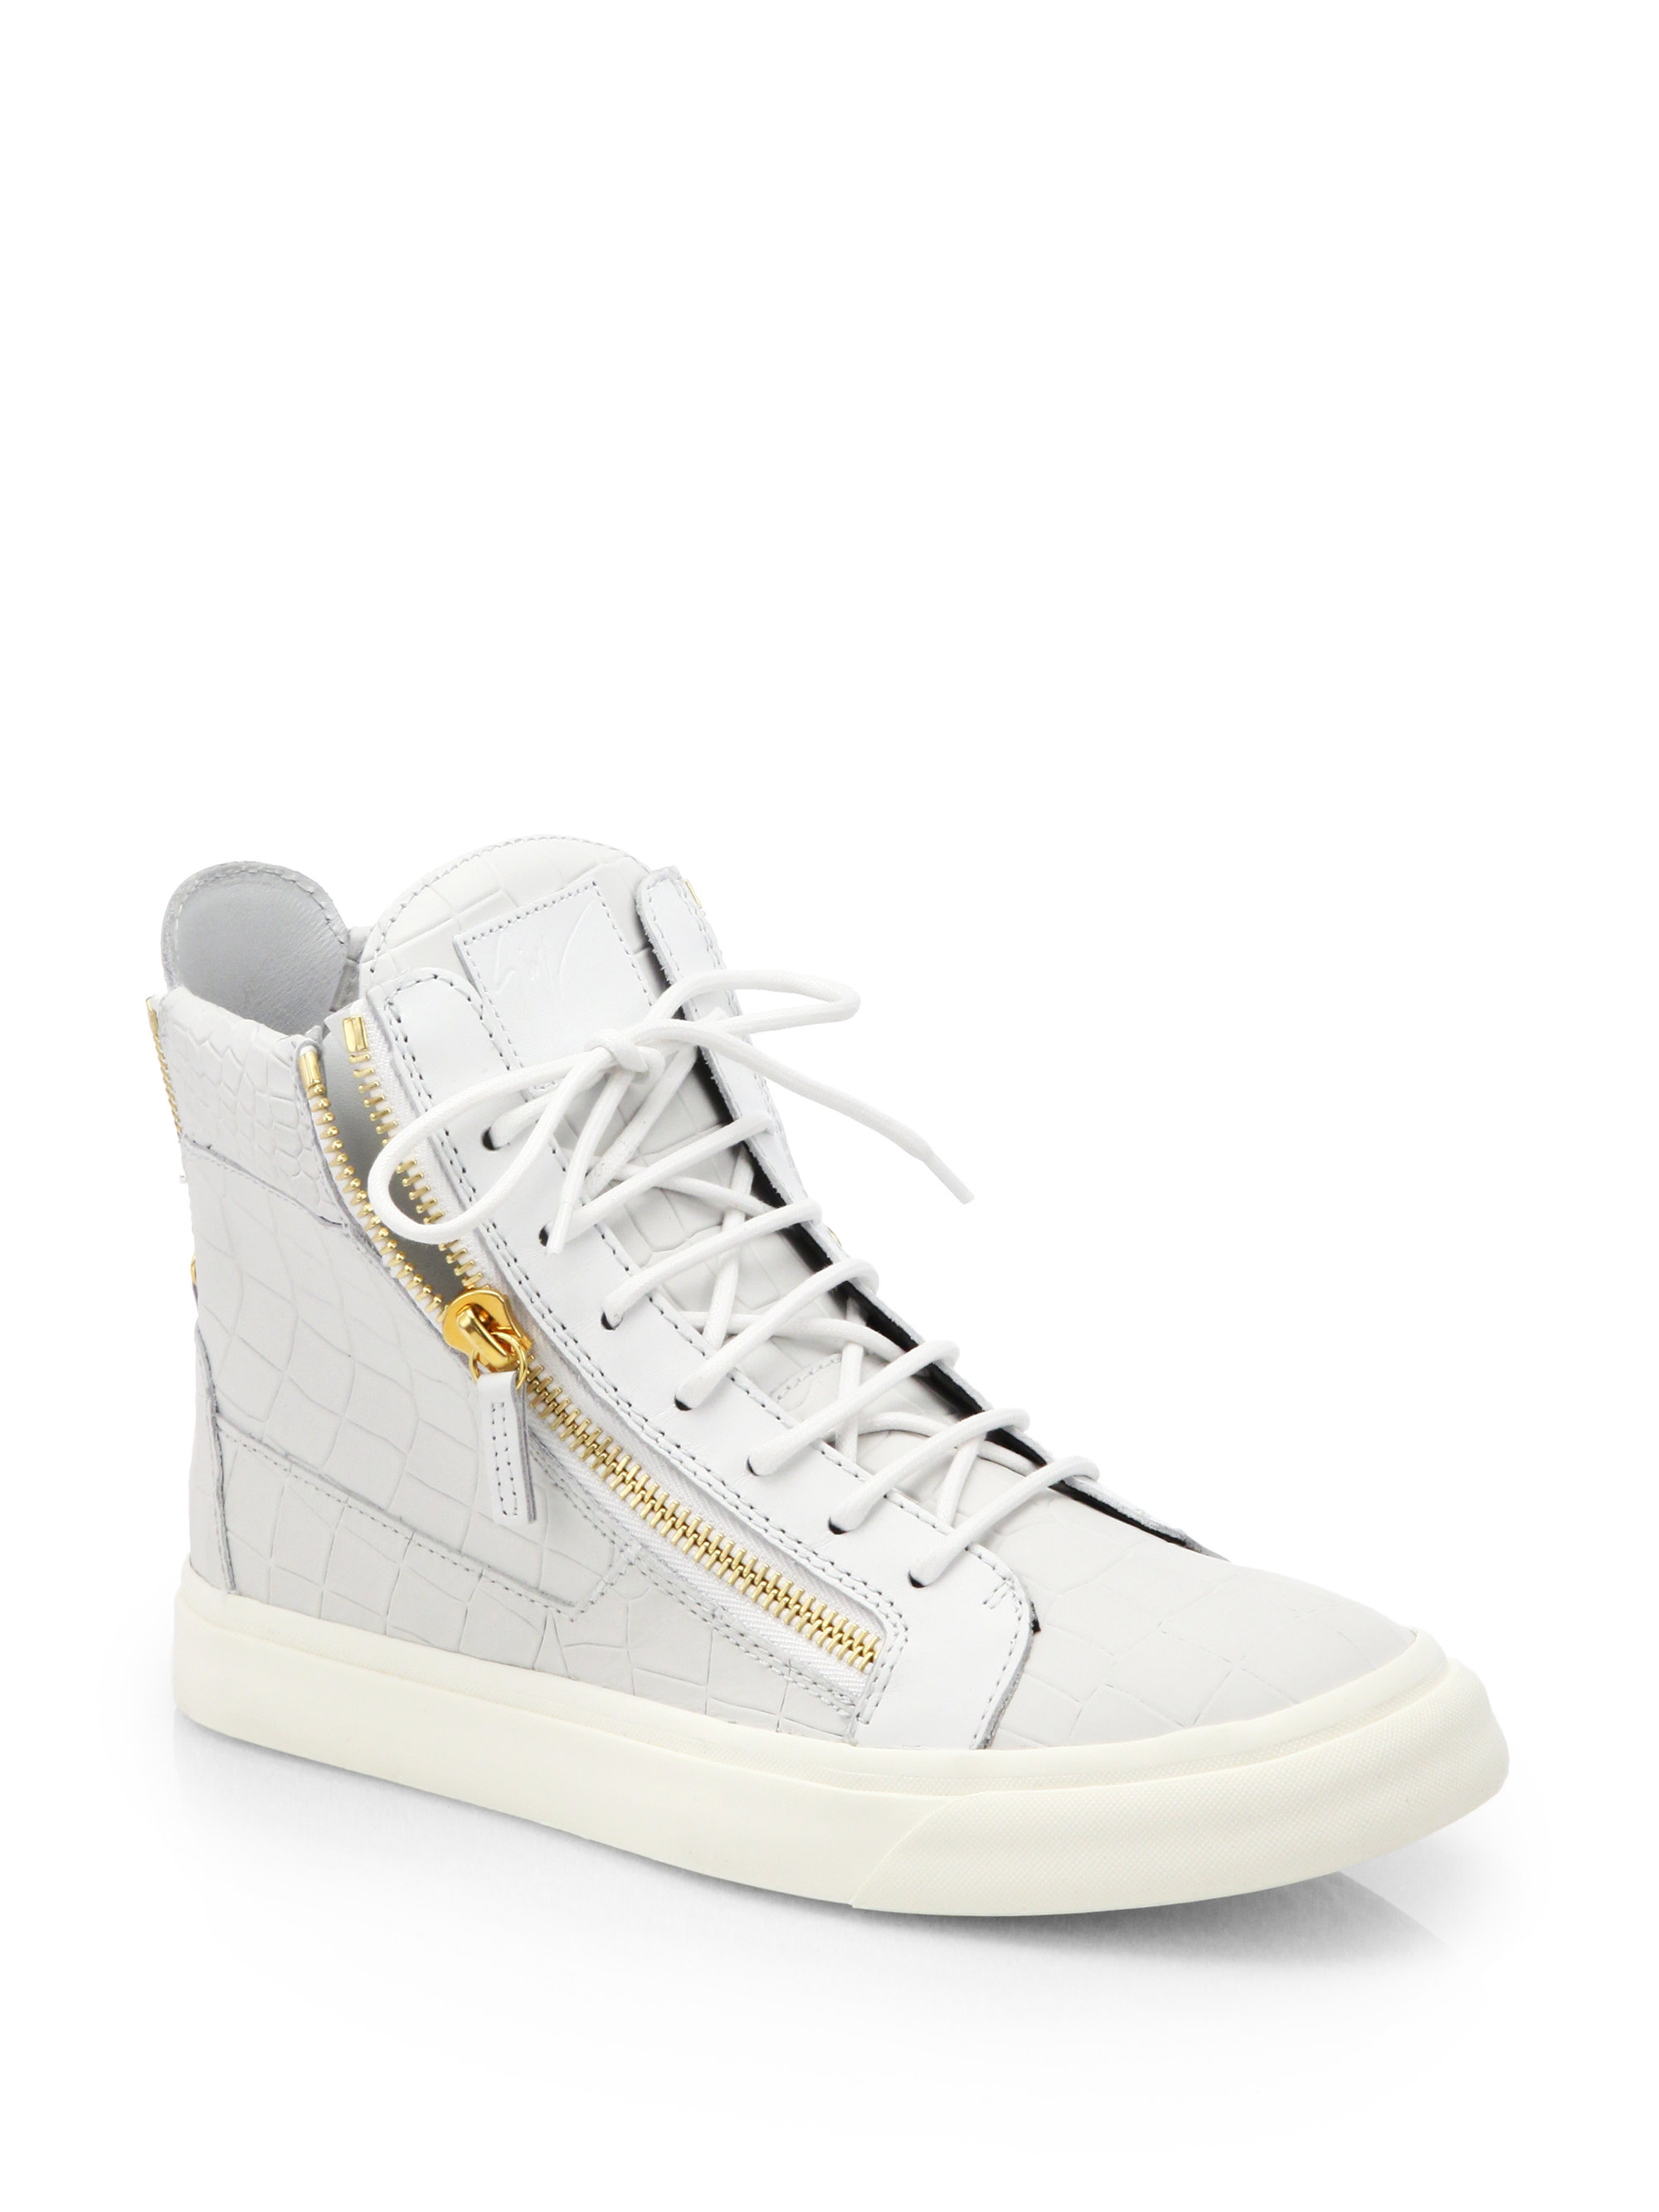 Giuseppe zanotti Nicki Croc-Embossed Leather High-Top Sneakers in White ...